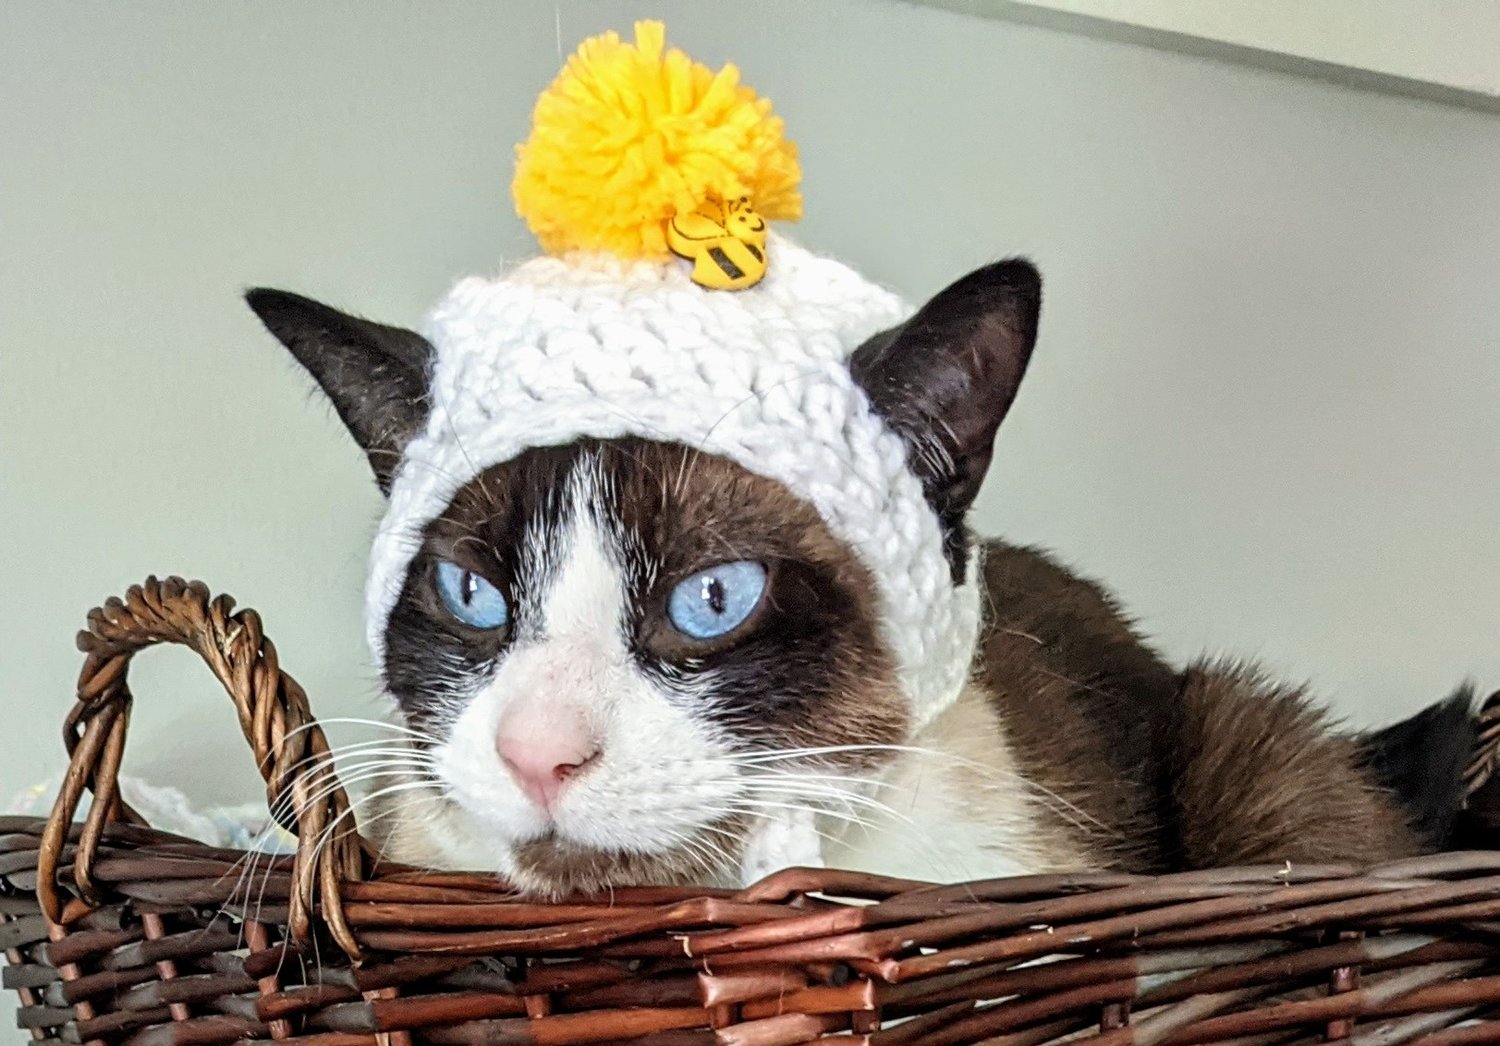 HENRY loves wearing his mom-knitted cap